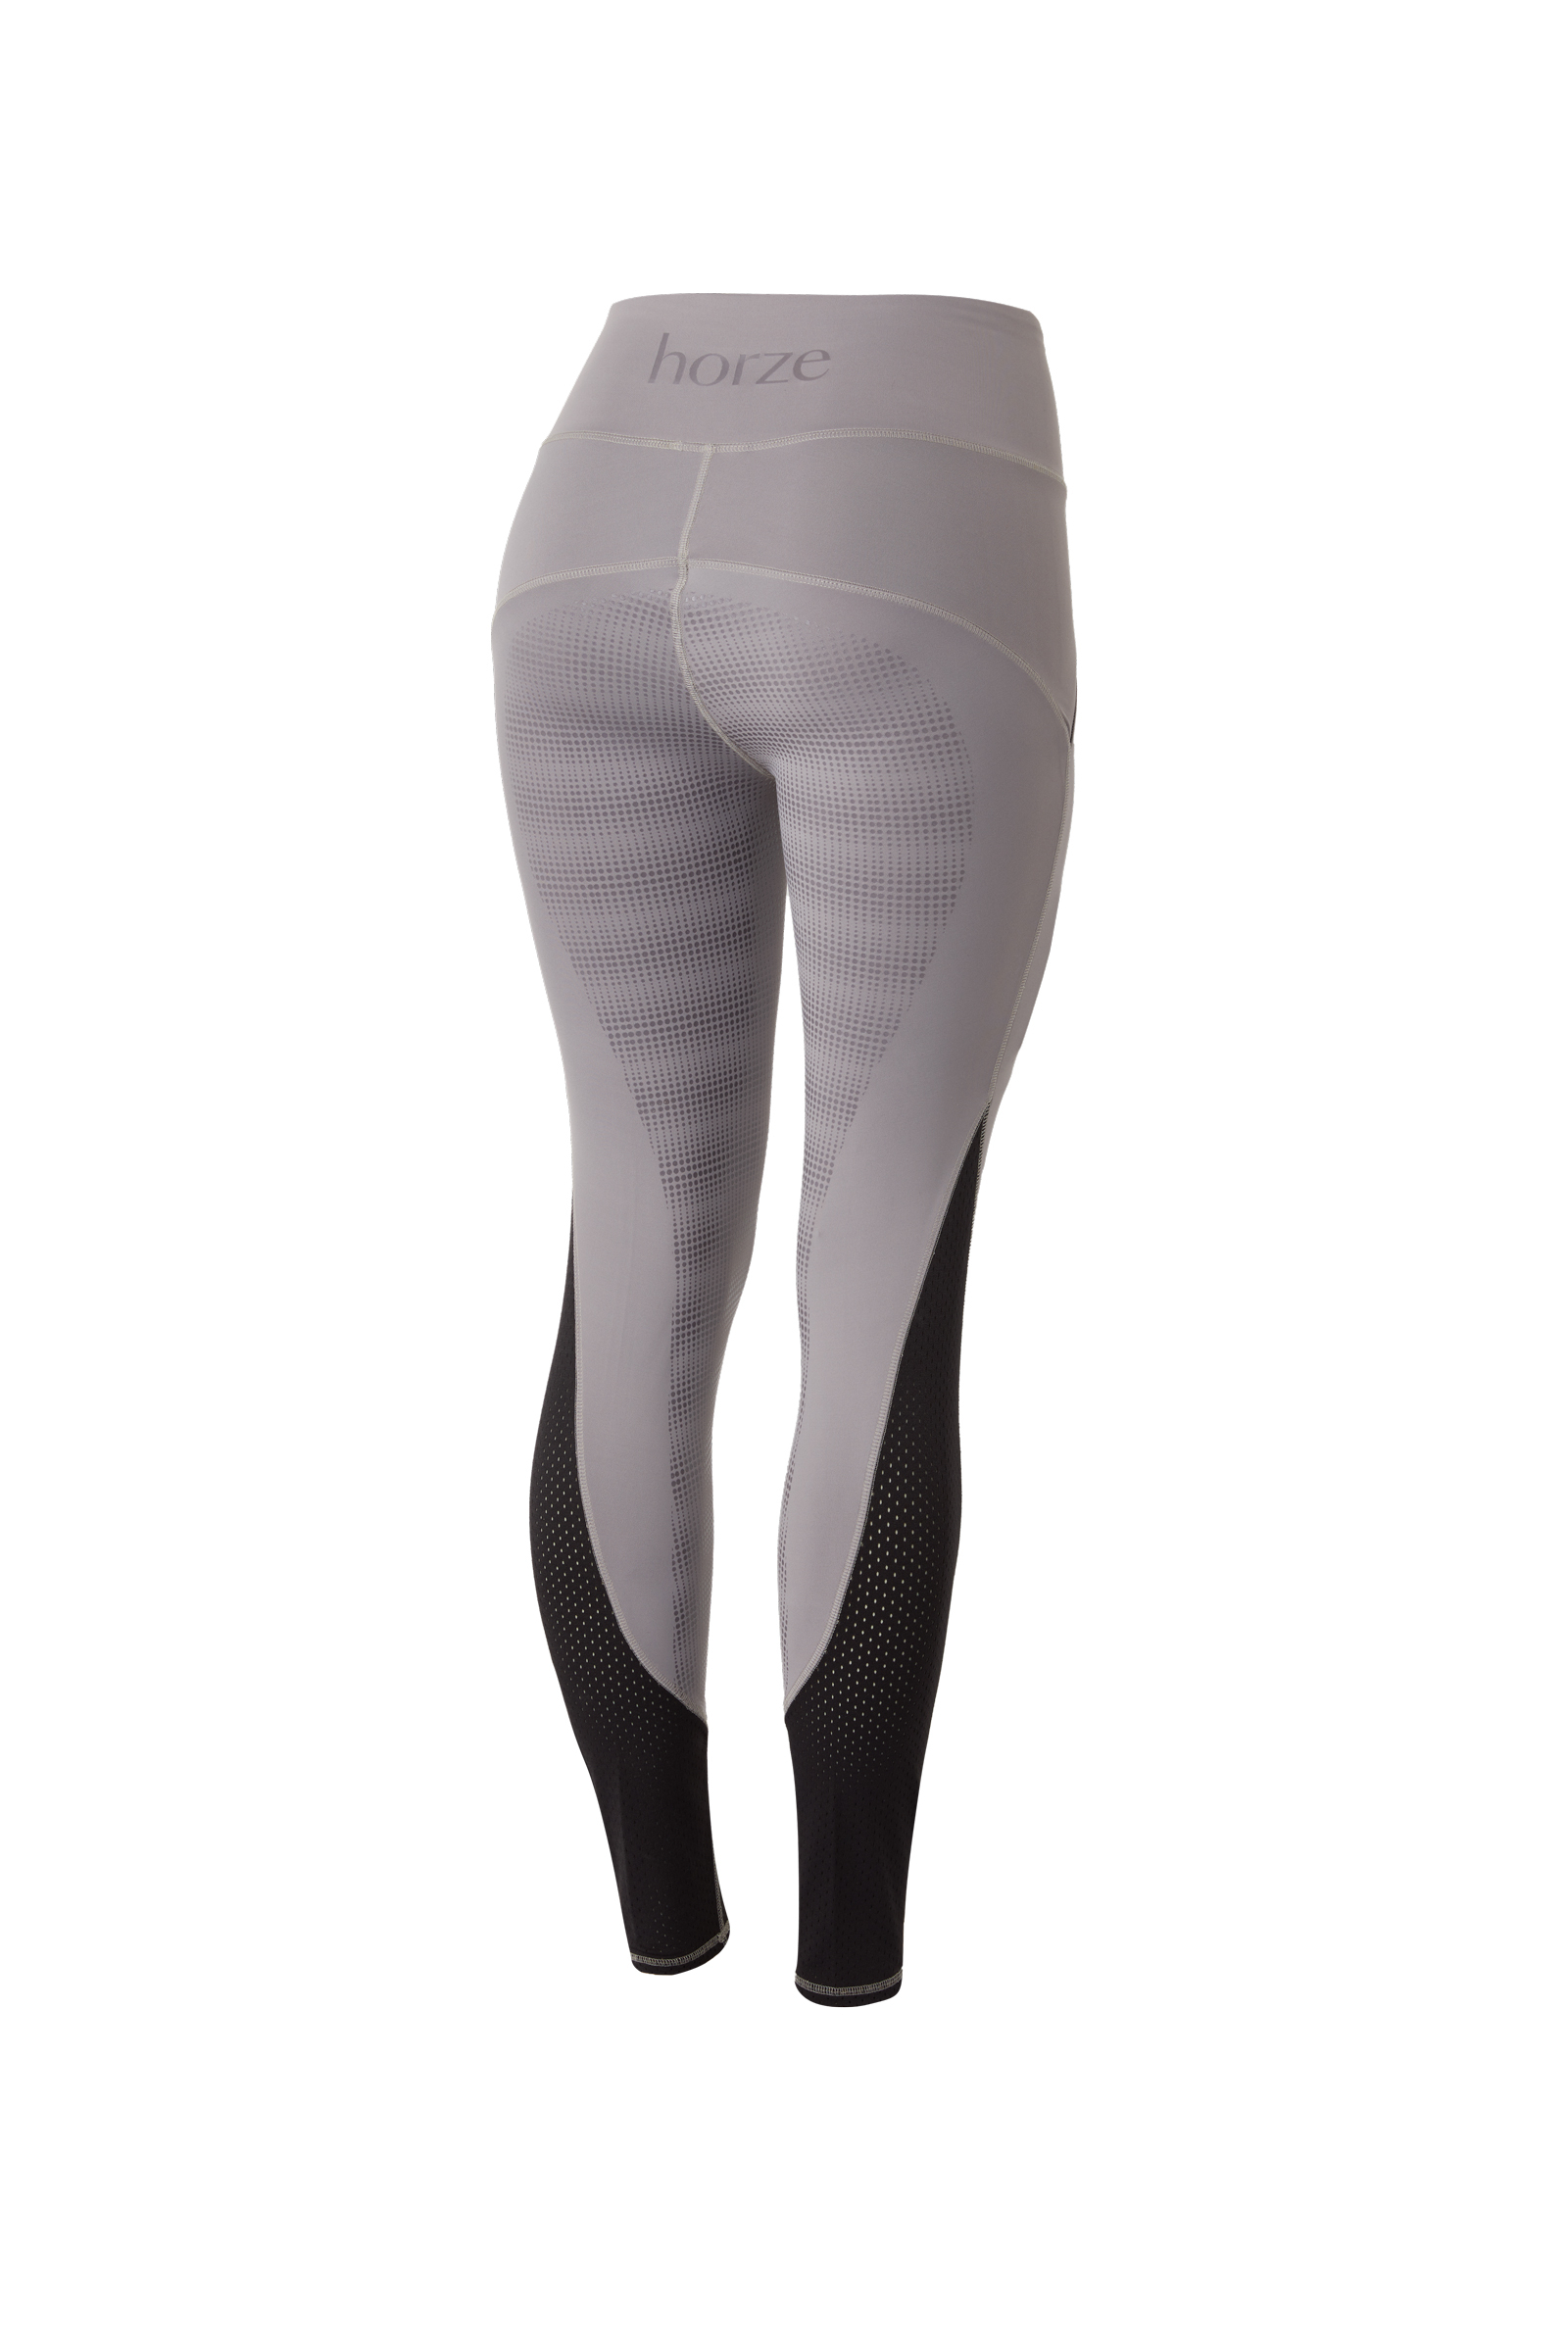 Buy Horze Women's Silicone Full Seat Riding Tights with Mesh